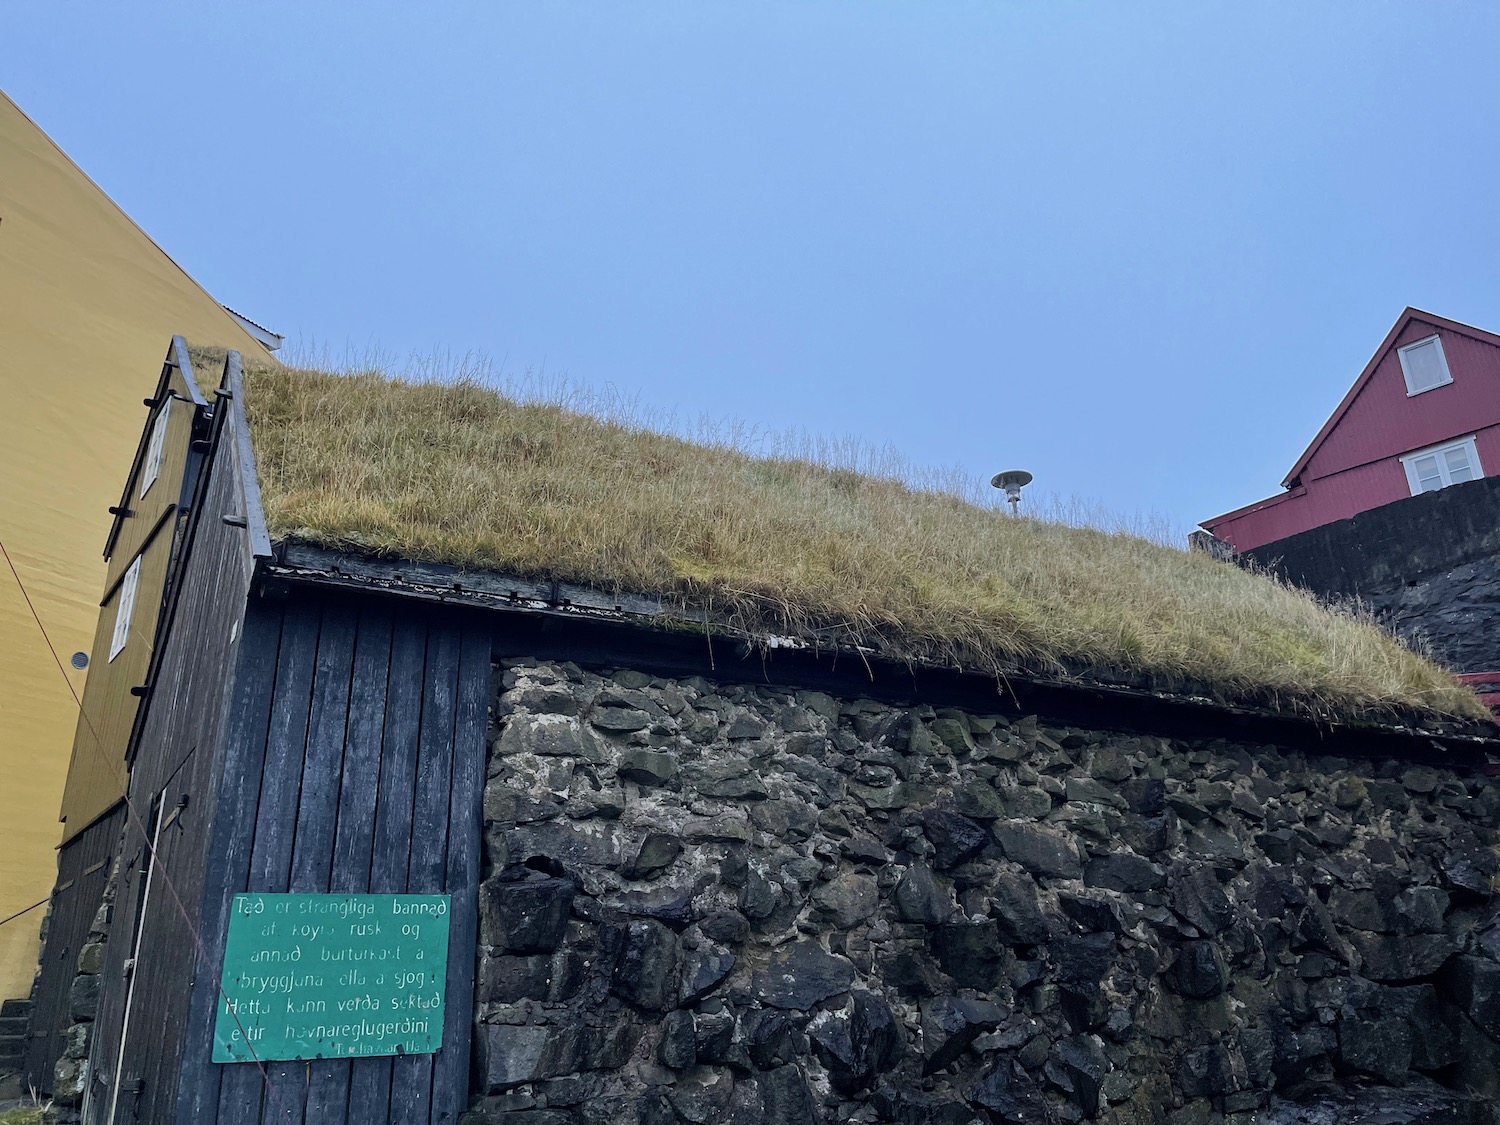 a stone wall with grass on the roof